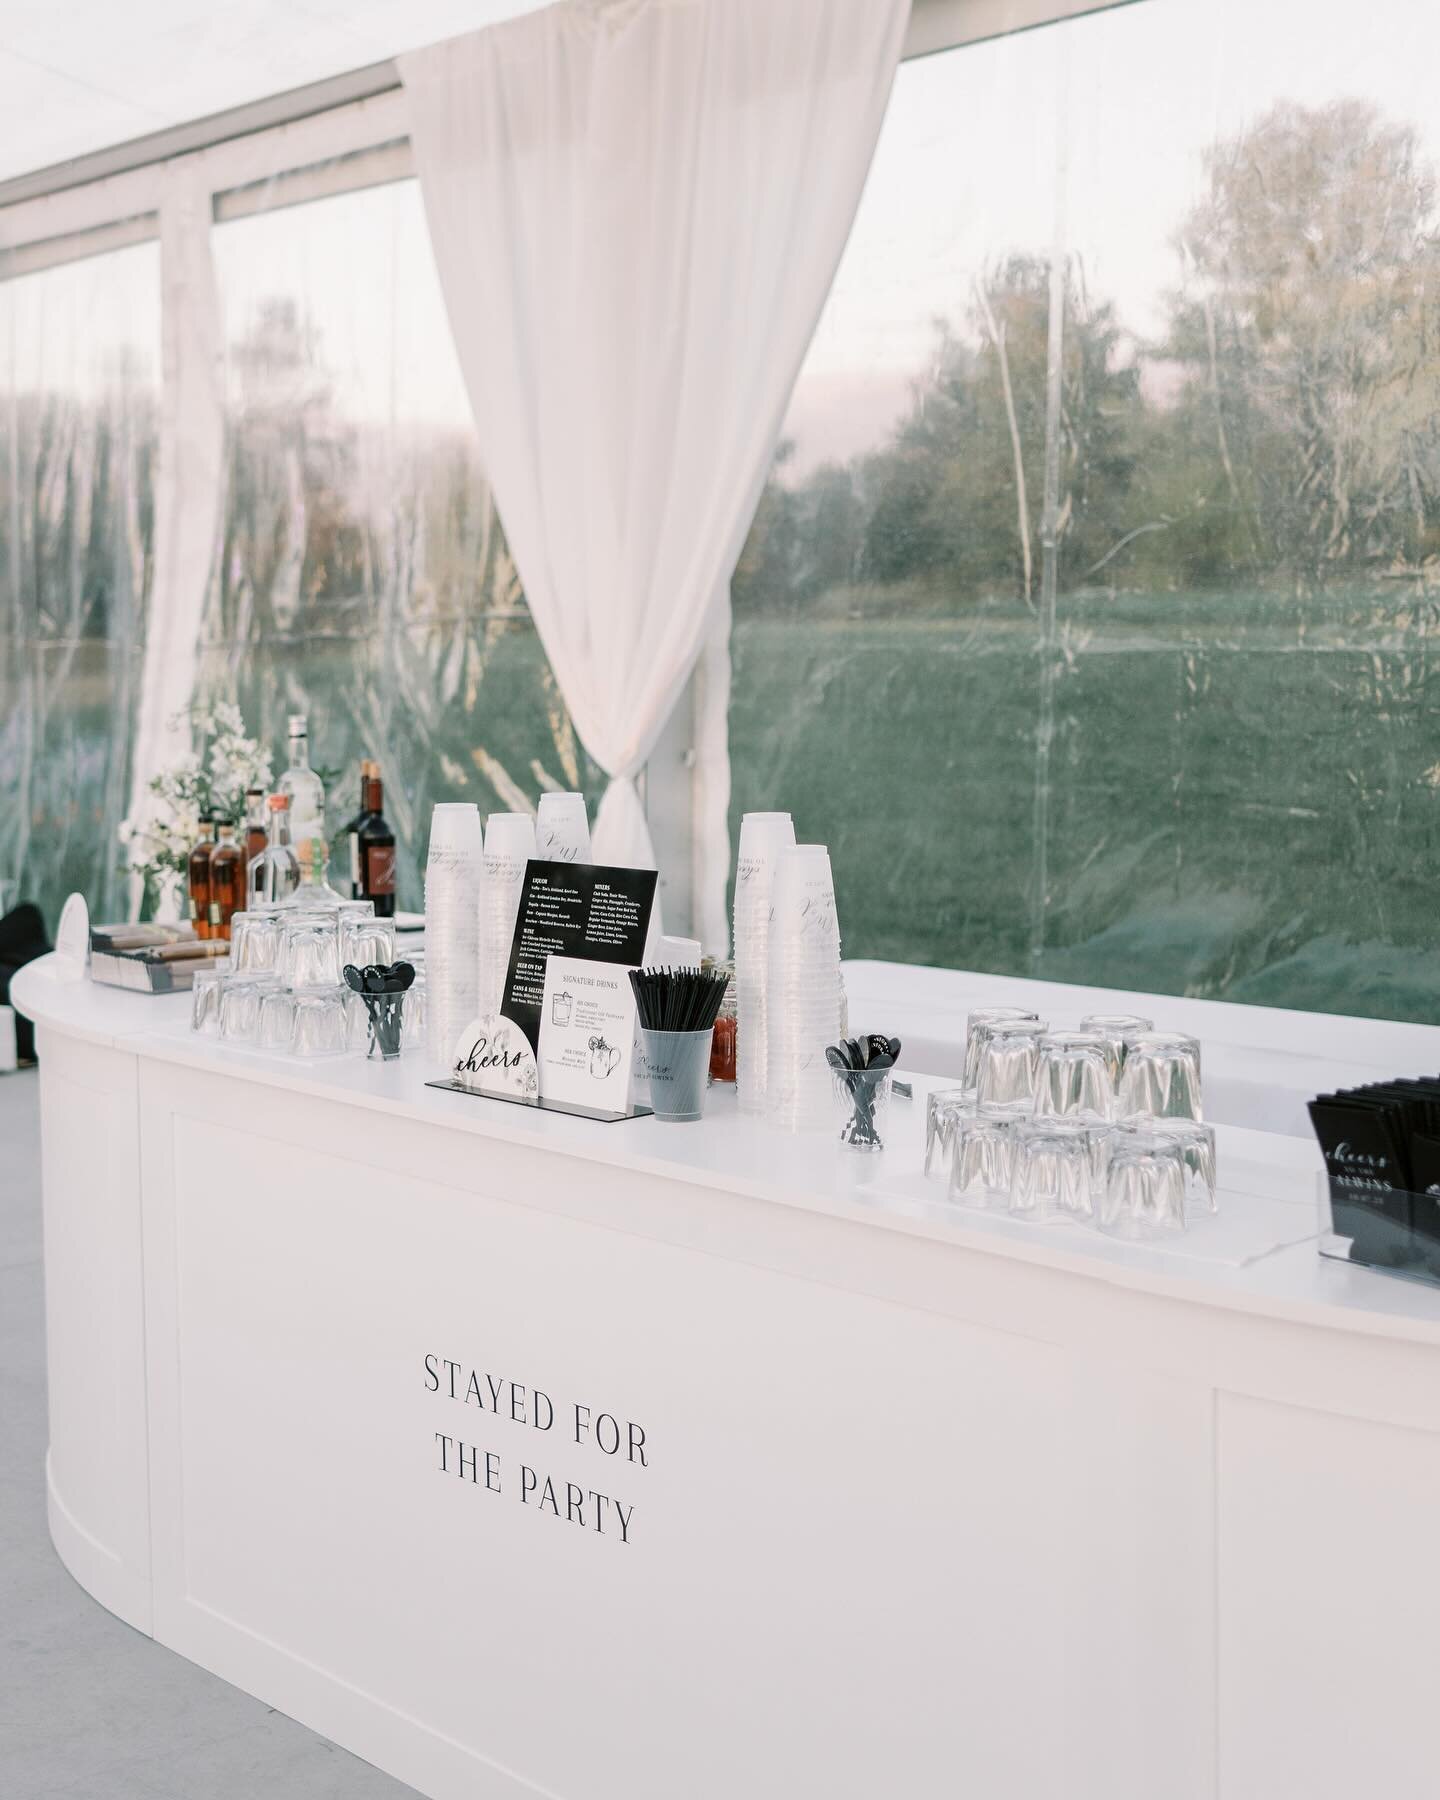 Reminiscing on this large custom built oval bar. Featuring custom bar signs and vinyl. We love that it now has a wonderful home at @theclubhousevenue 

Planner: @evaandcoevents 
Venue: @theclubhousevenue 
Photographer: @kassidyilaynestudios